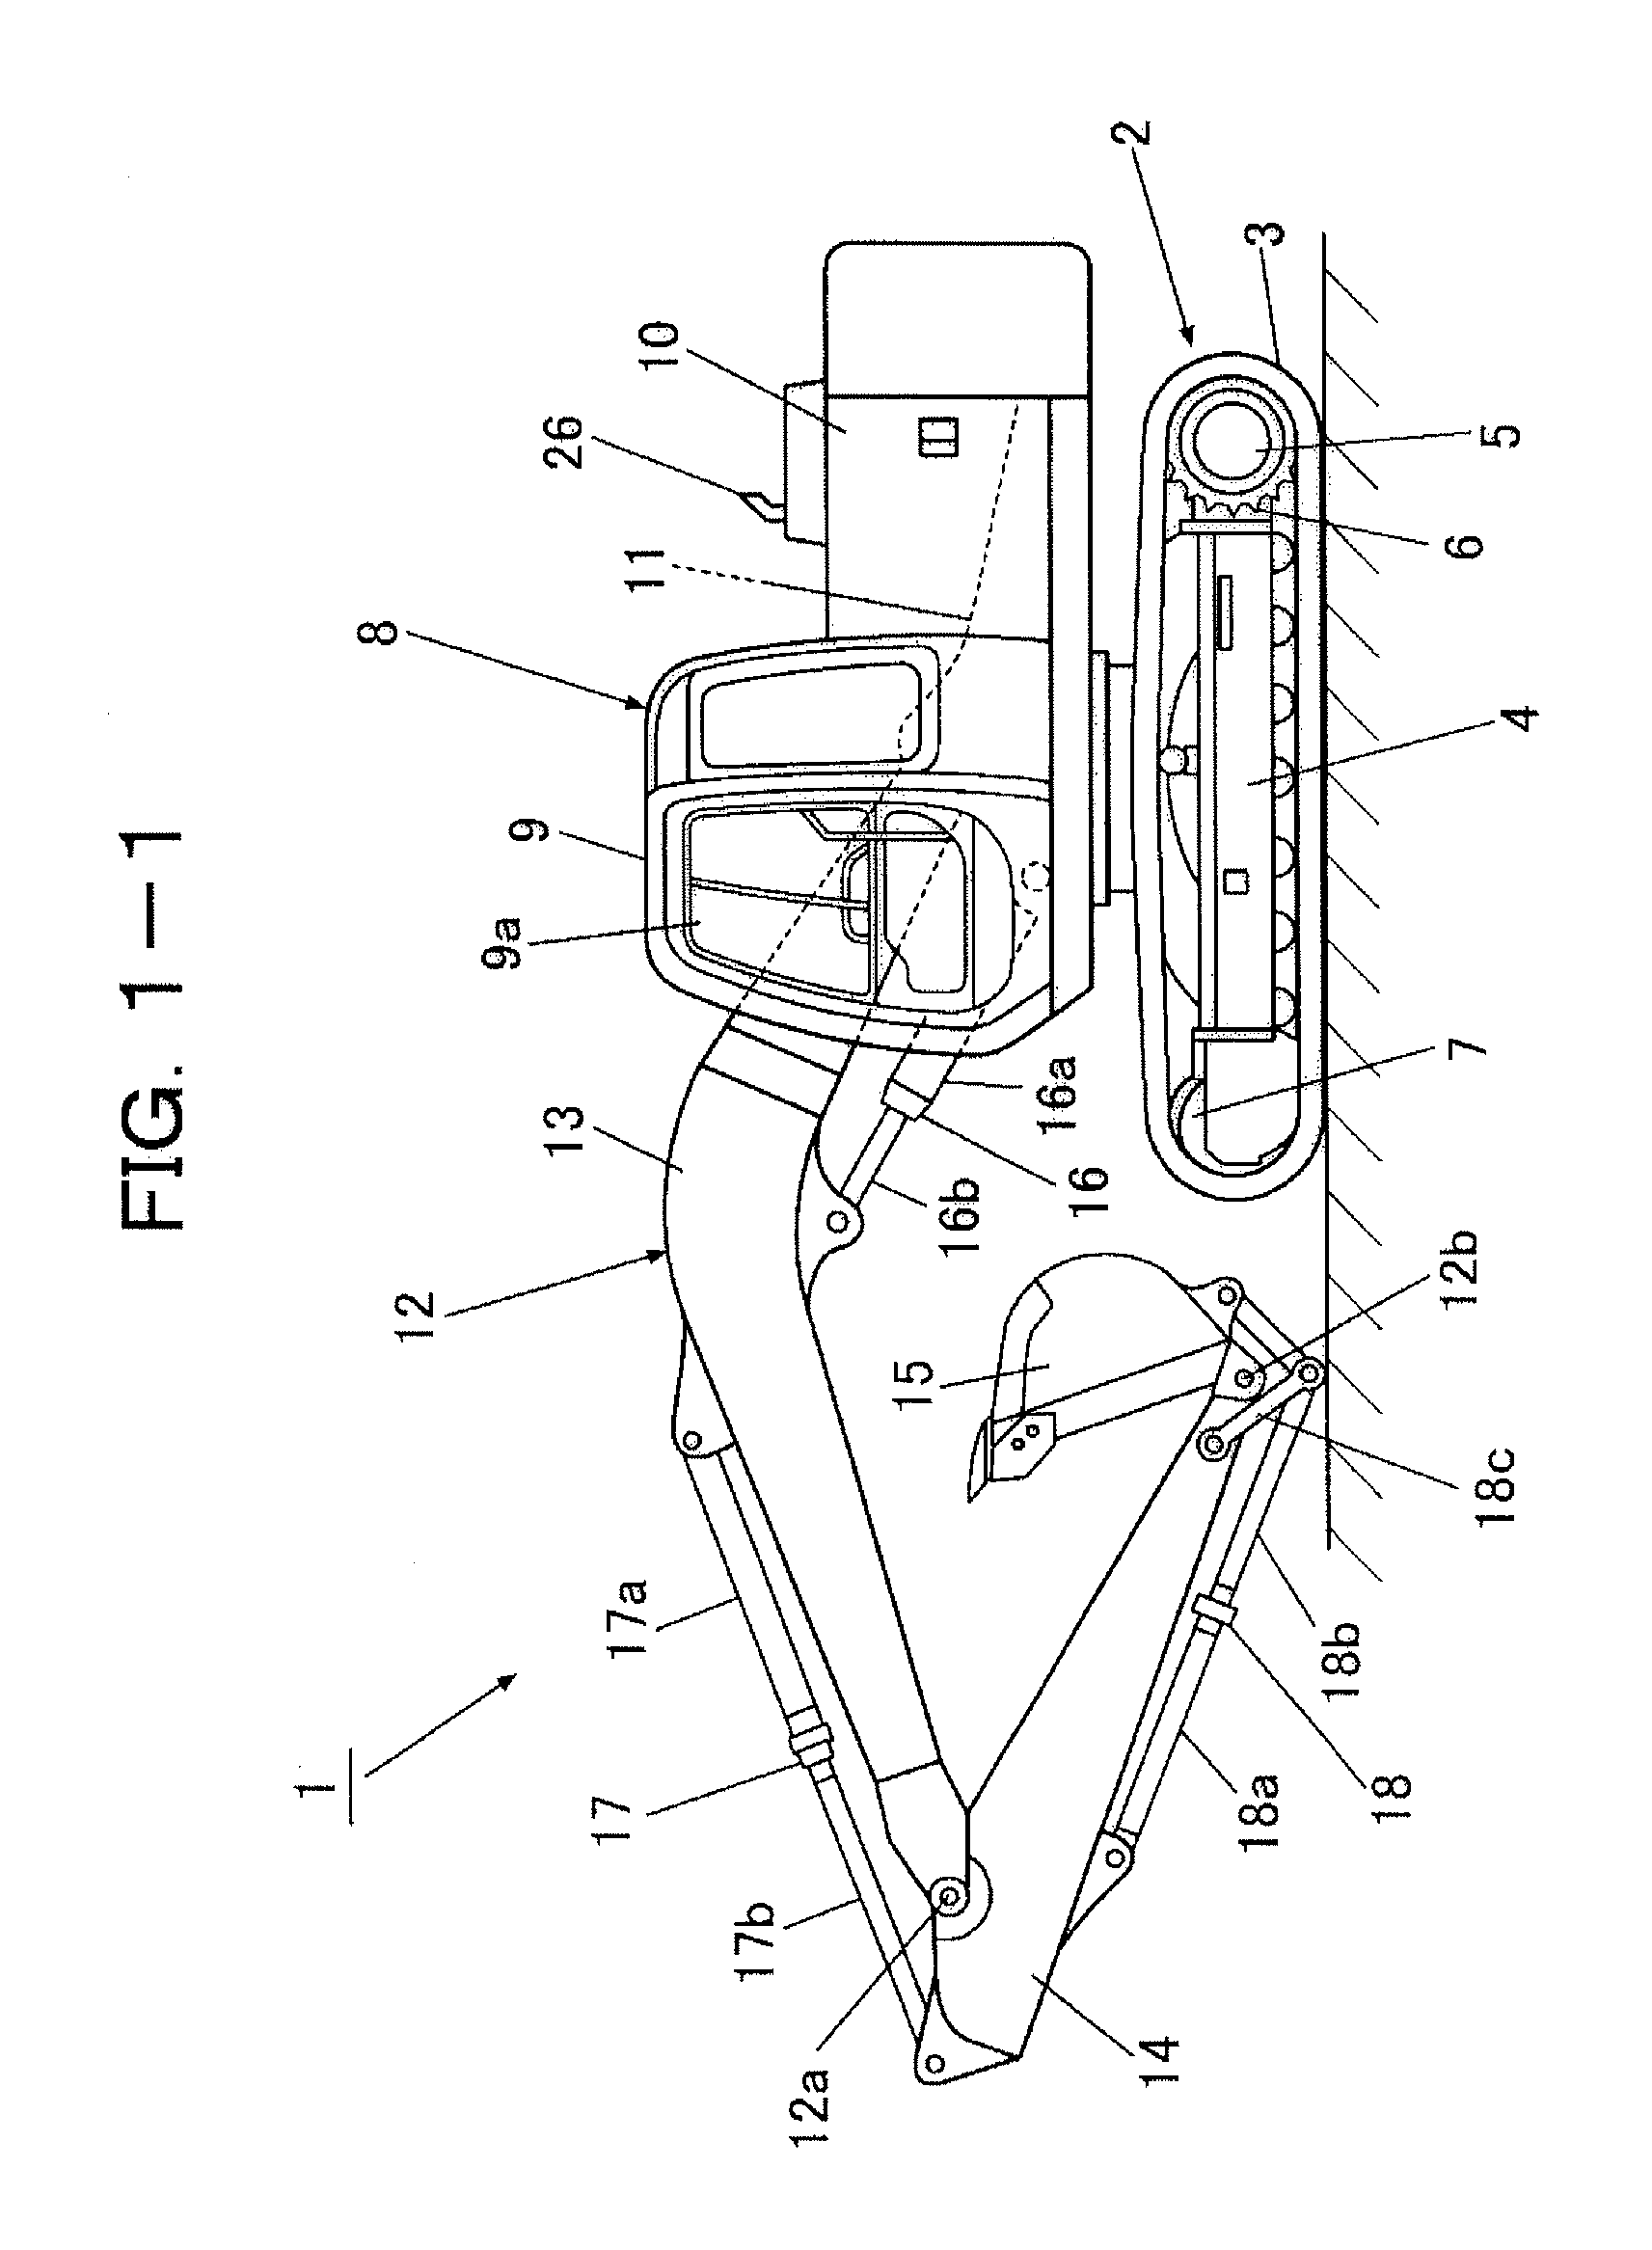 Hydraulic Drive Apparatus for Construction Equipment